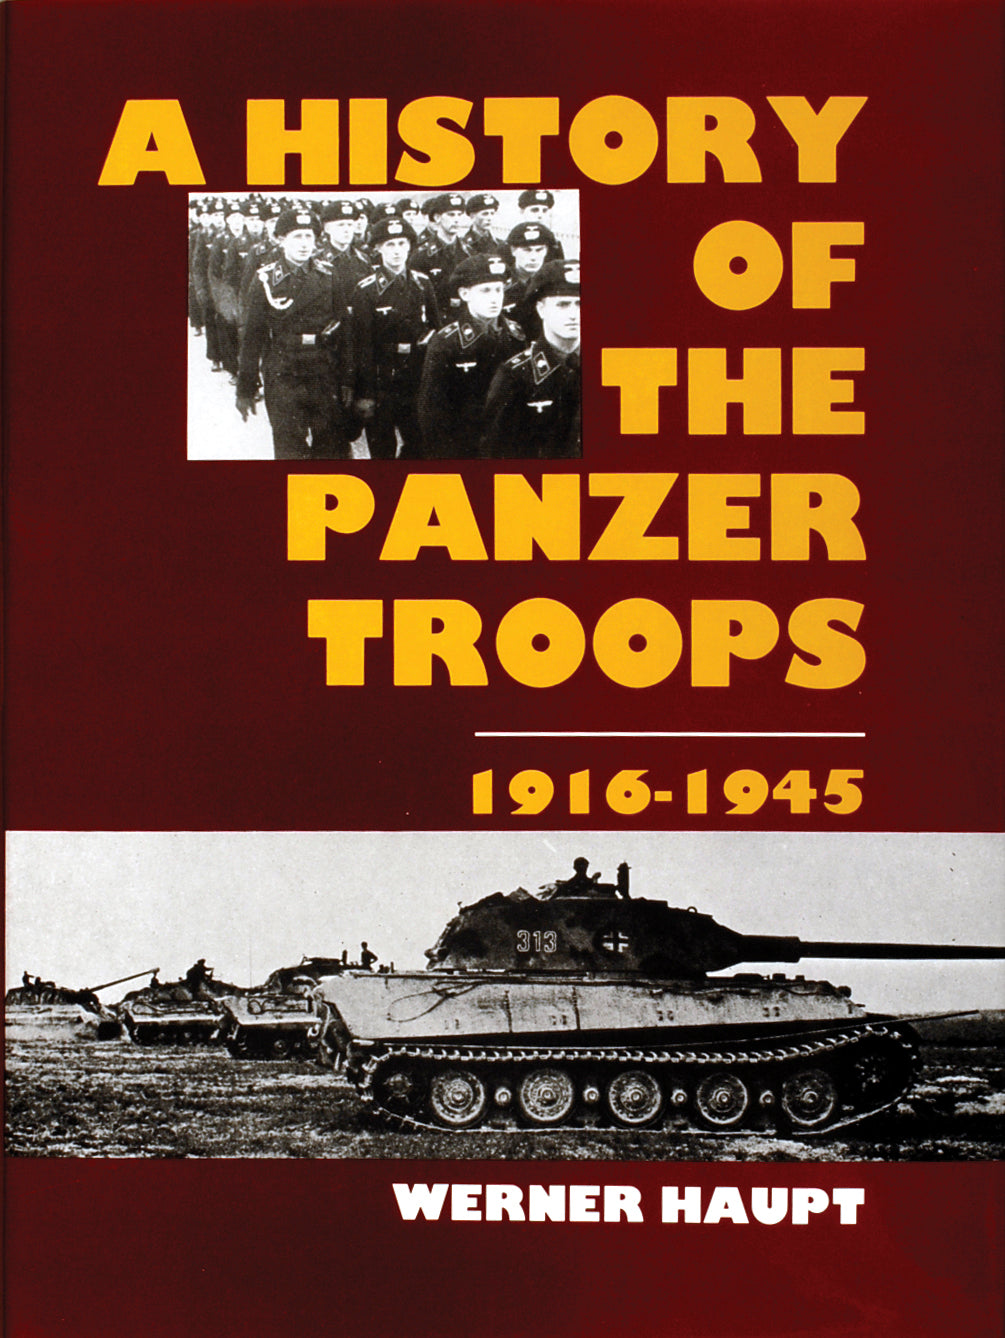 The History of the Panzer Troops 1916-1945